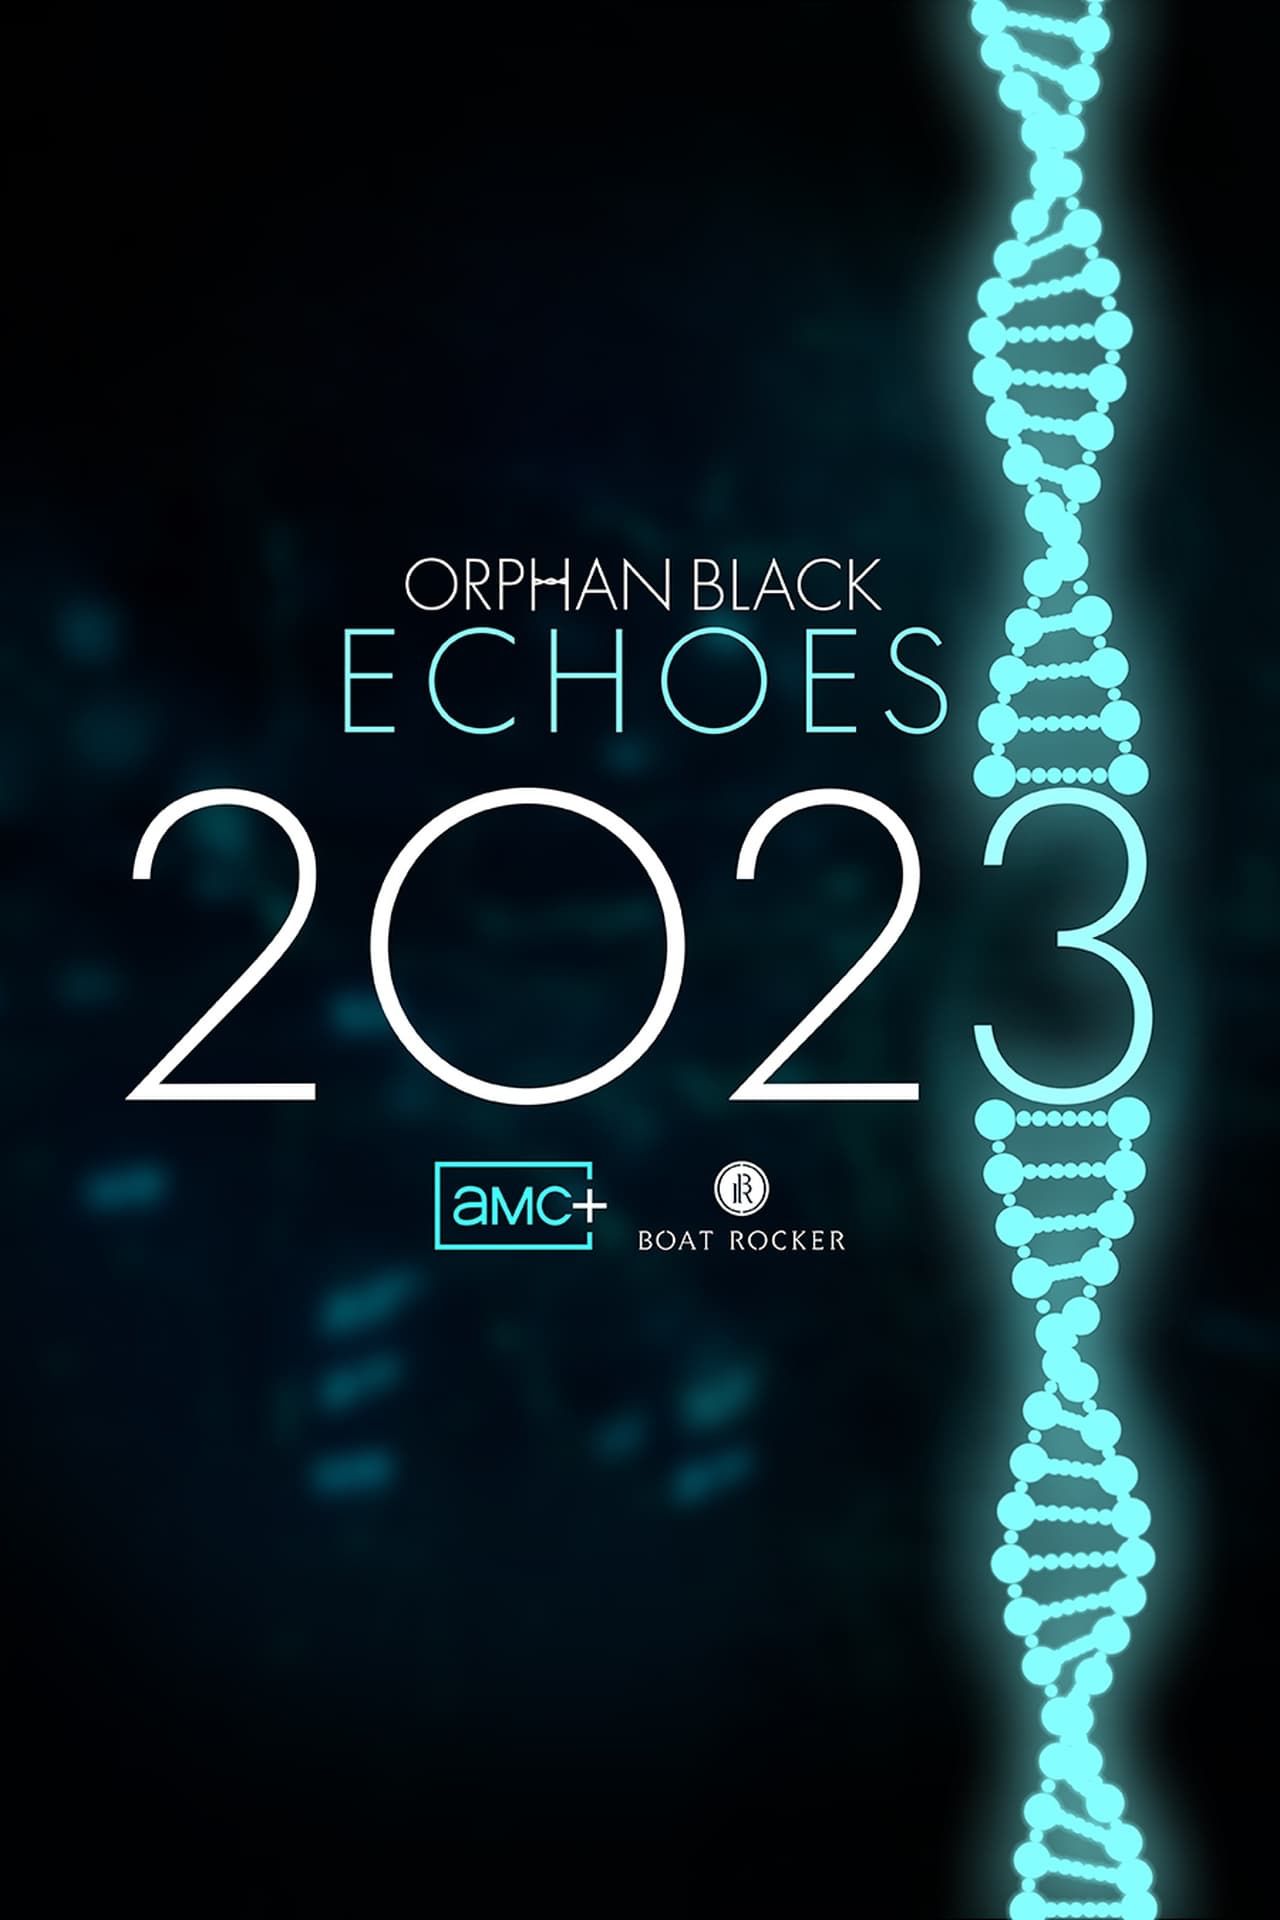 Orphan Black: Echoes Premiere Date Confirmed With Clone-Filled New Trailer